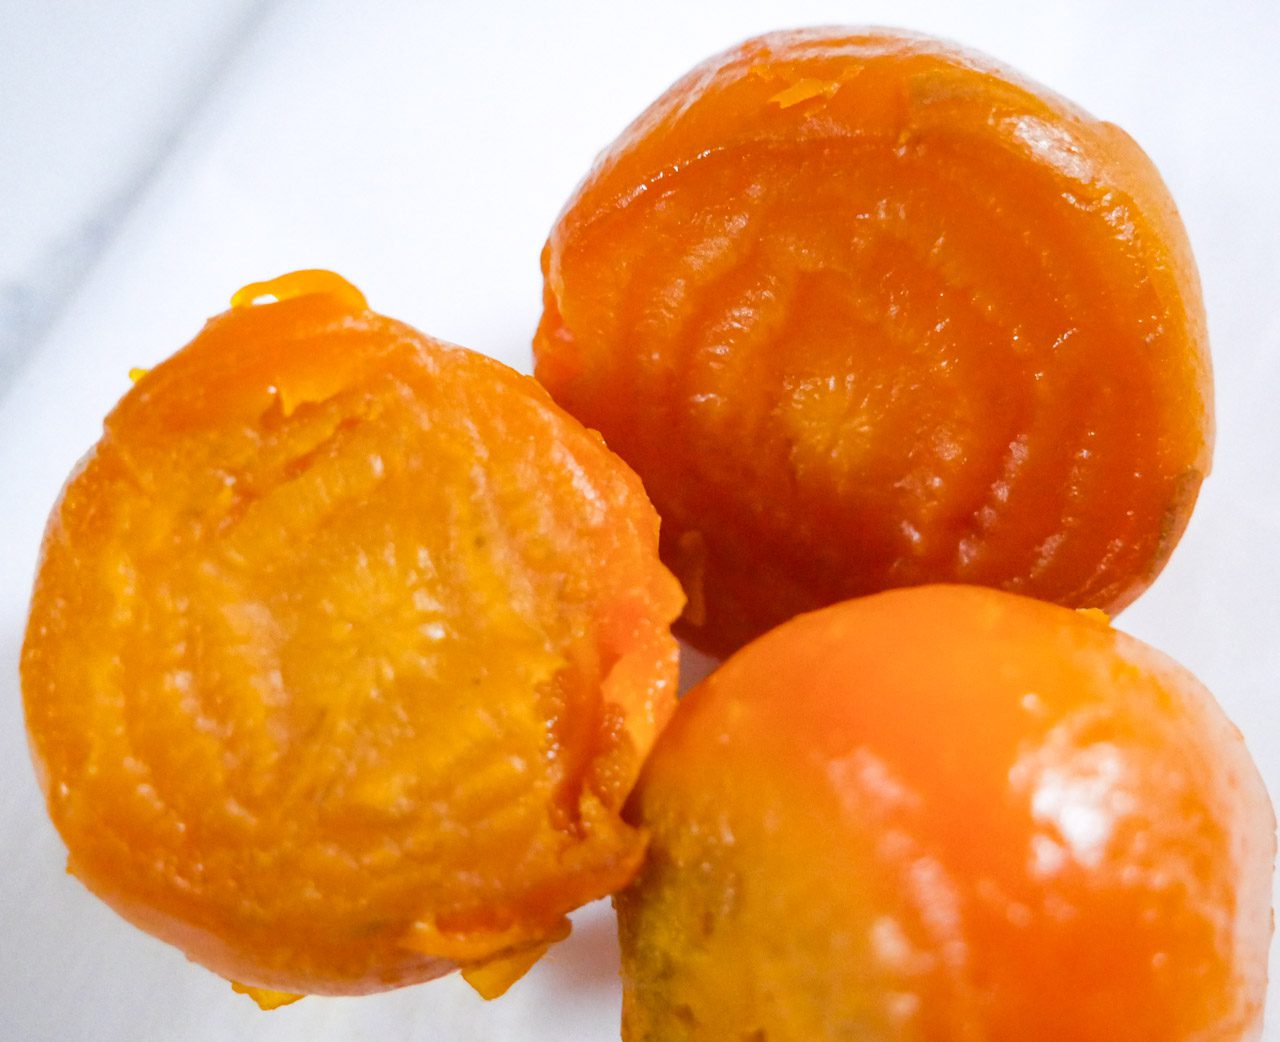 Roasted golden beets with skin off